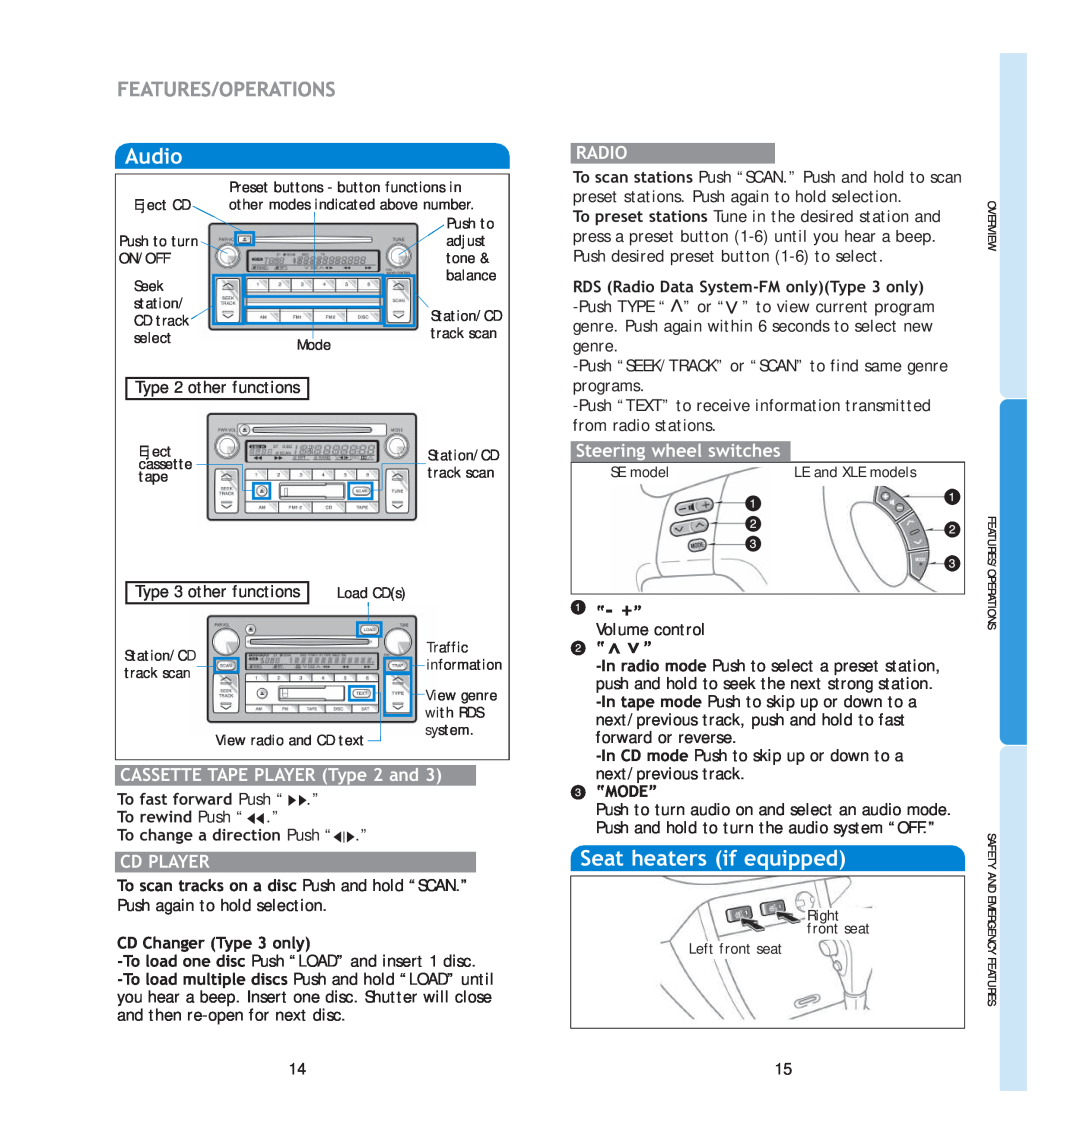 Toyota 2006 manual Audio, “- +”, Features/Operations 